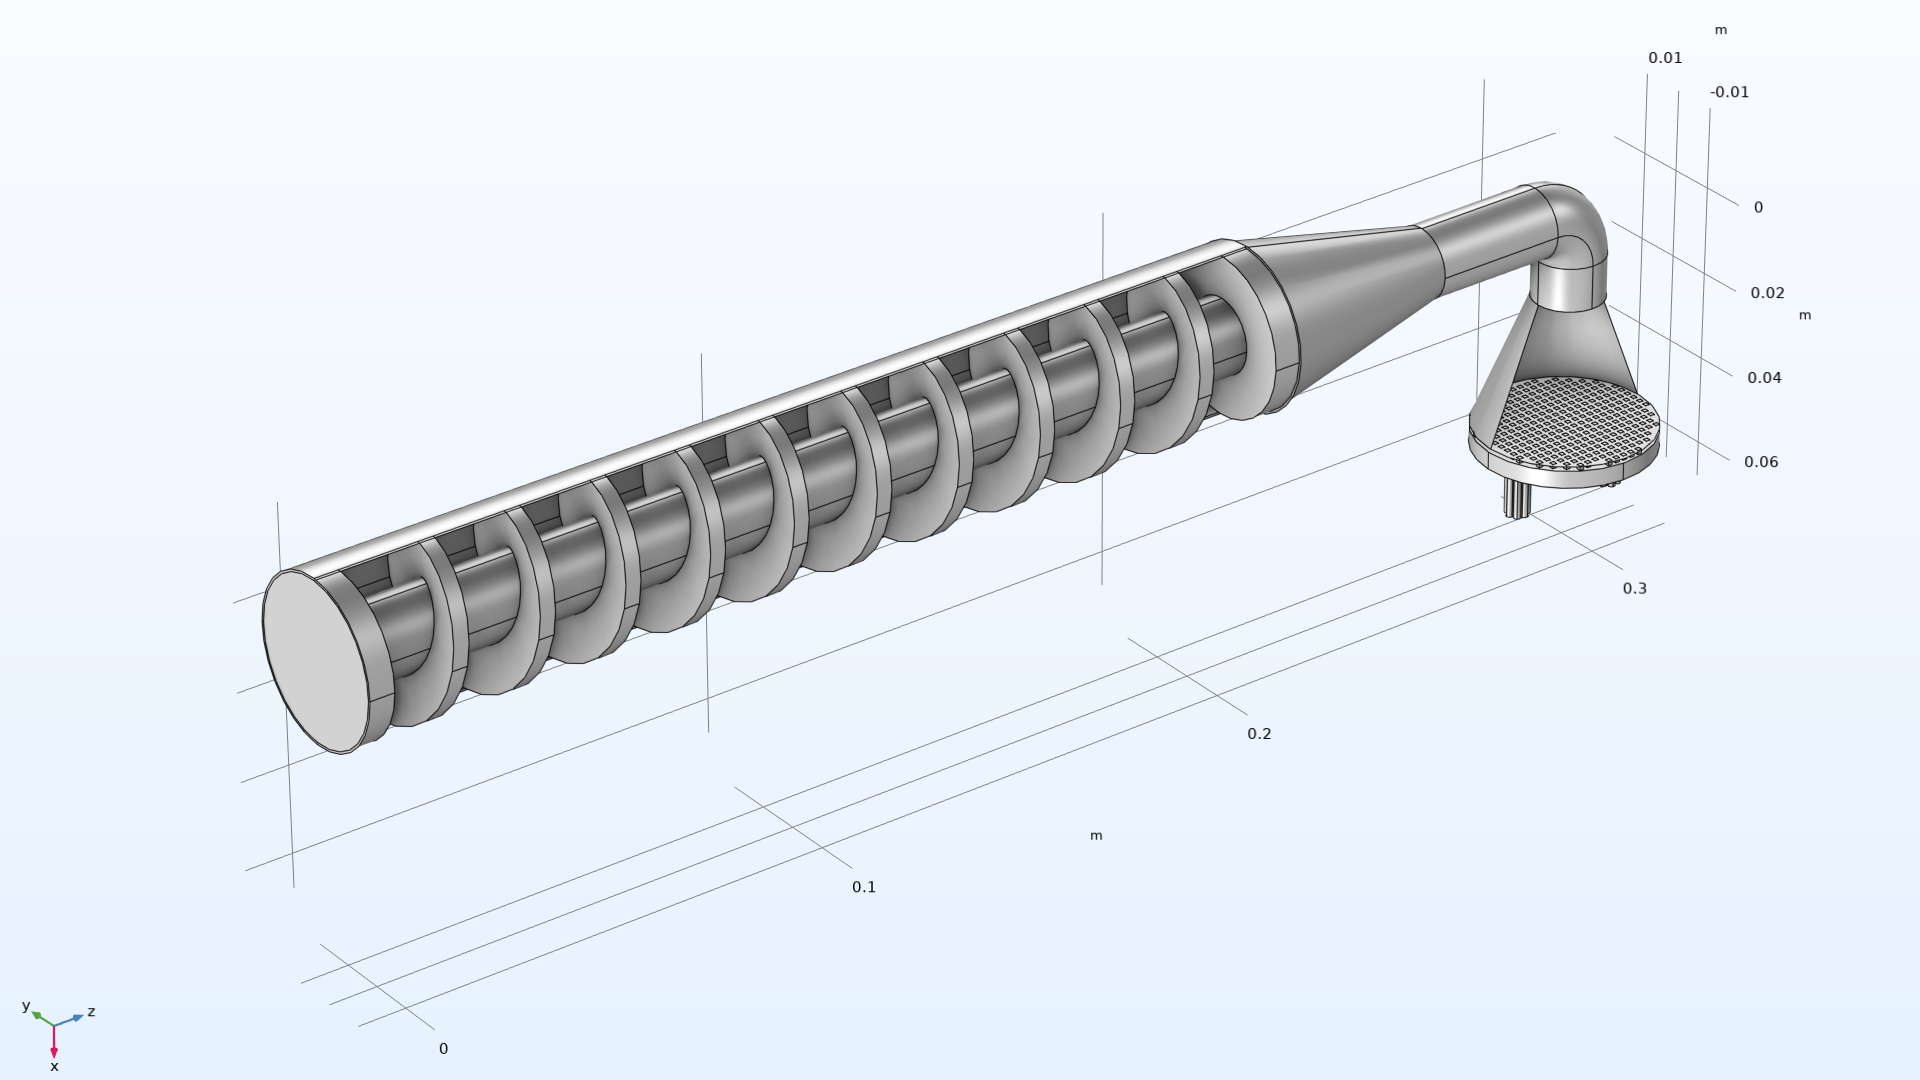 The geometry of a pasta extruder model that has metal blades spiraling around the center rod, and a nozzle at the right end.